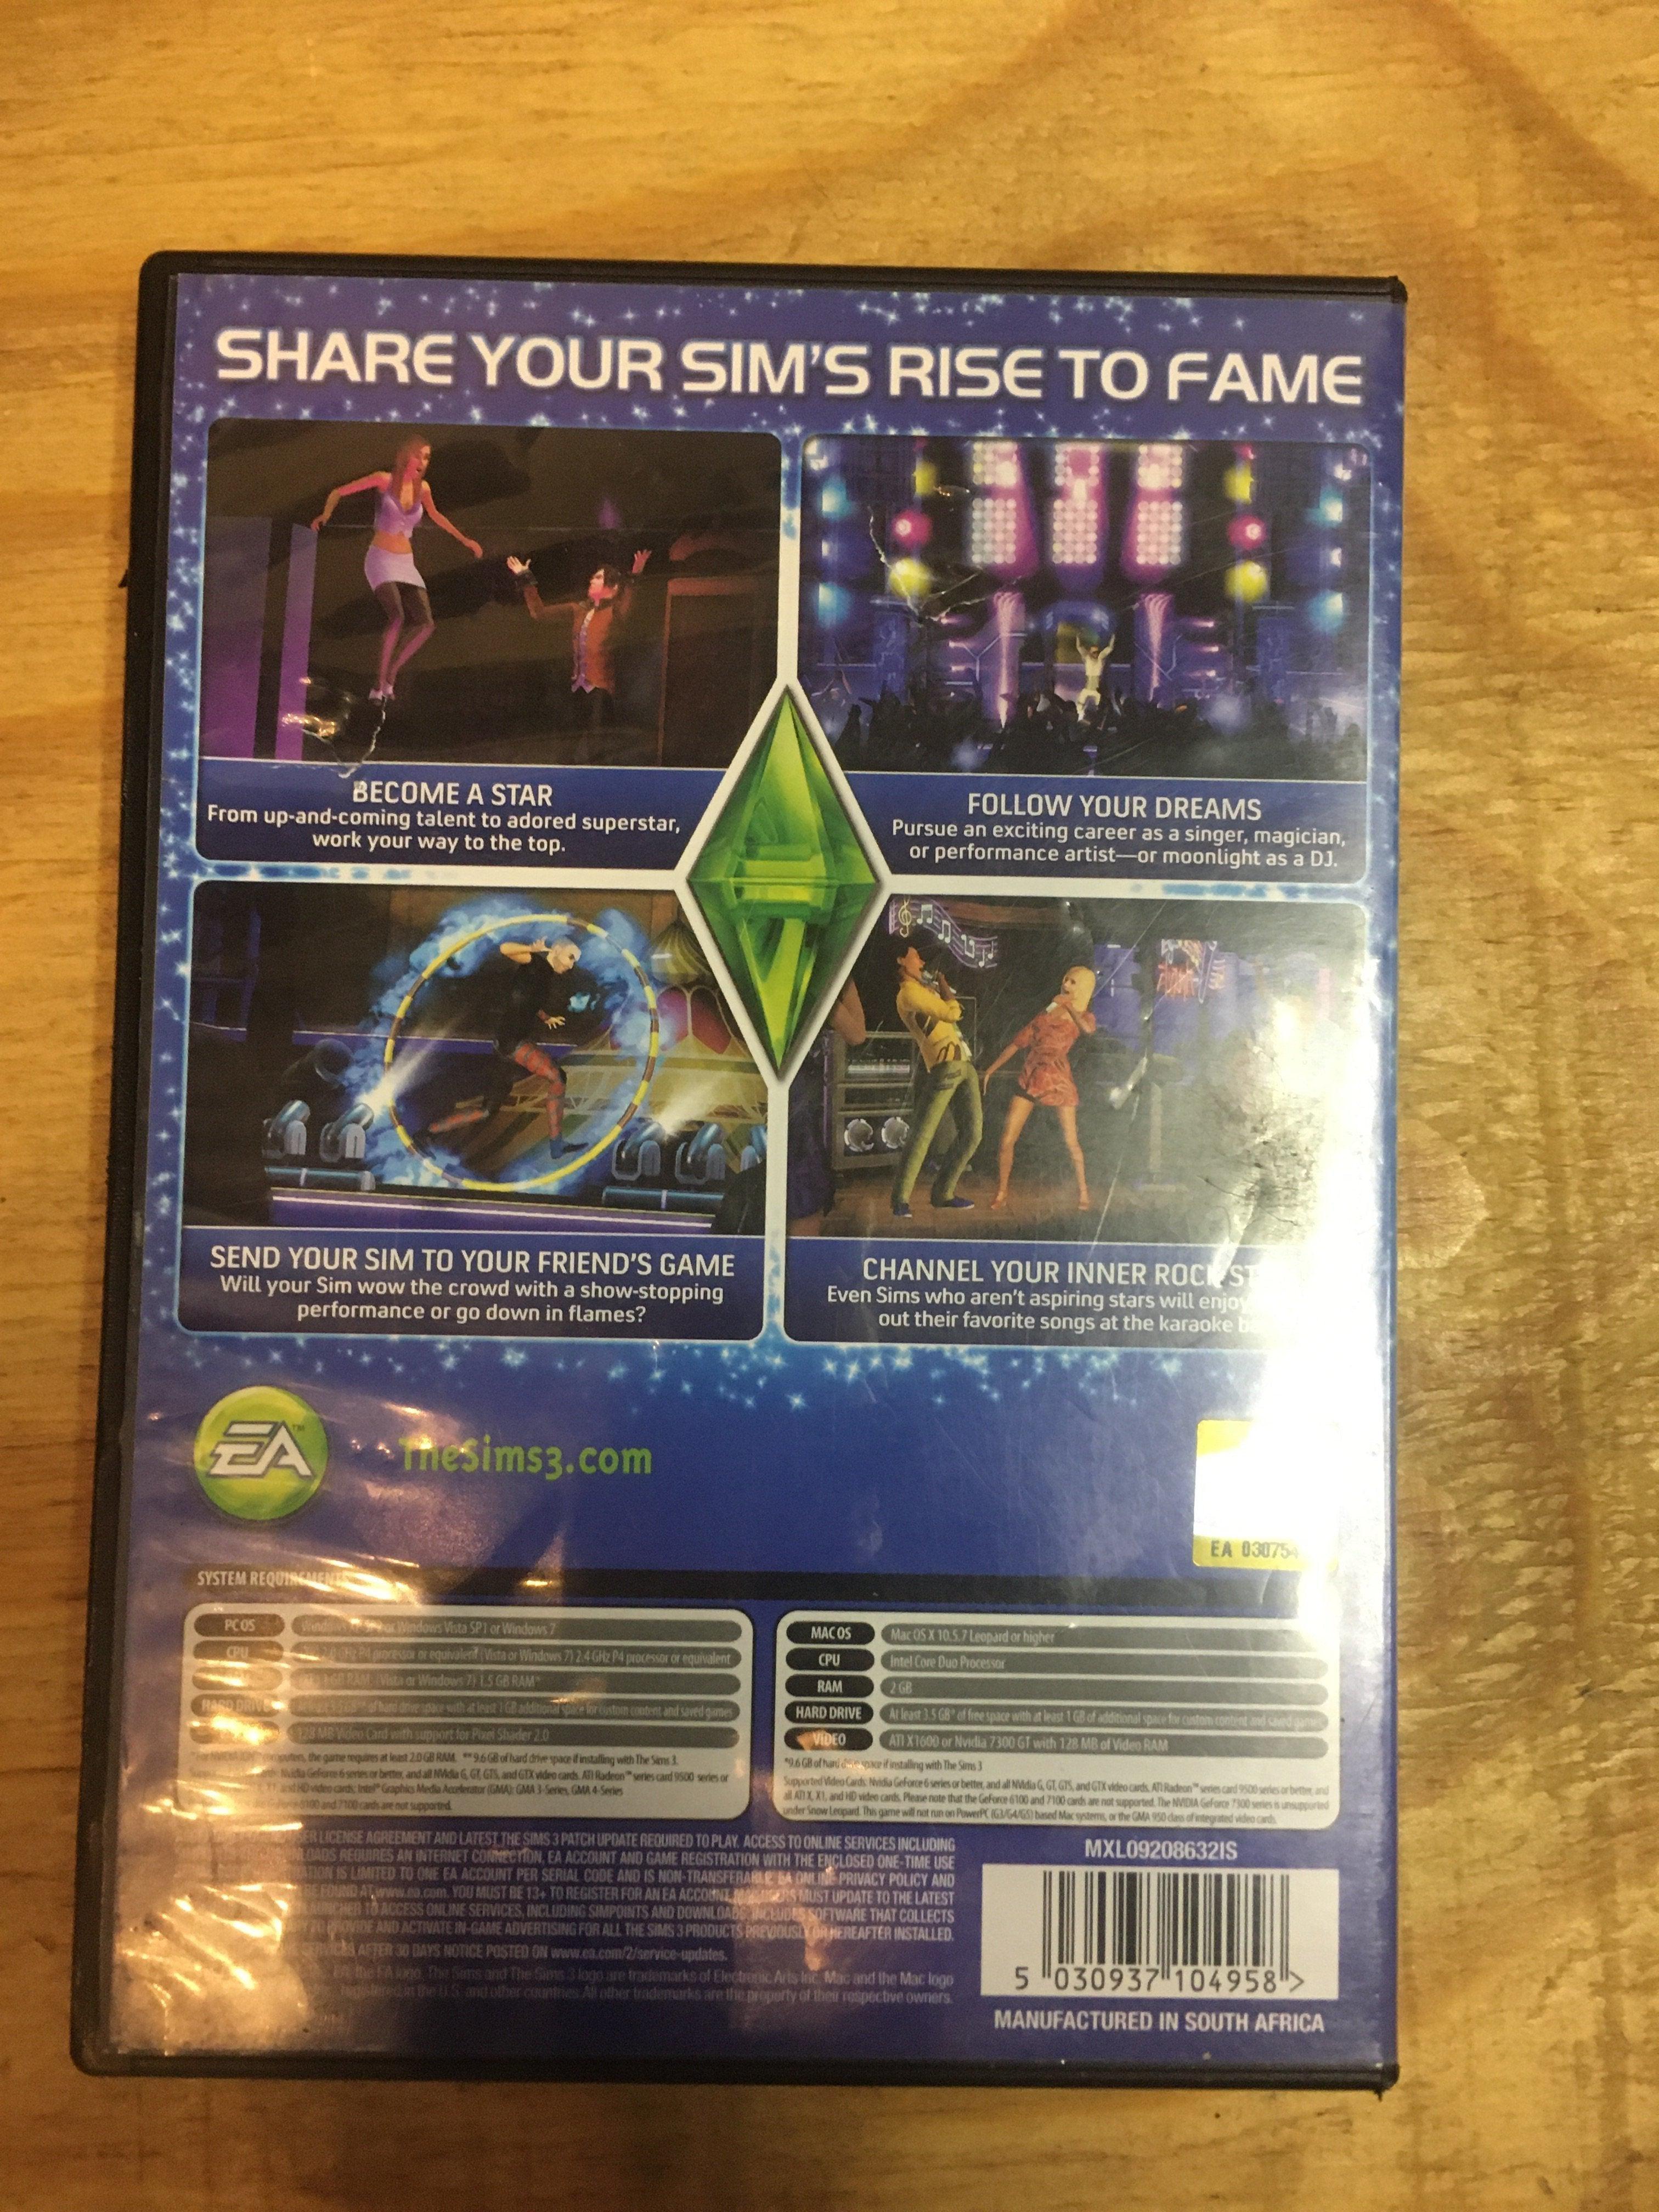 Free: Sims 4 limited edition + Get To Work expansion pack winner gets both  pc games! - PC Games -  Auctions for Free Stuff